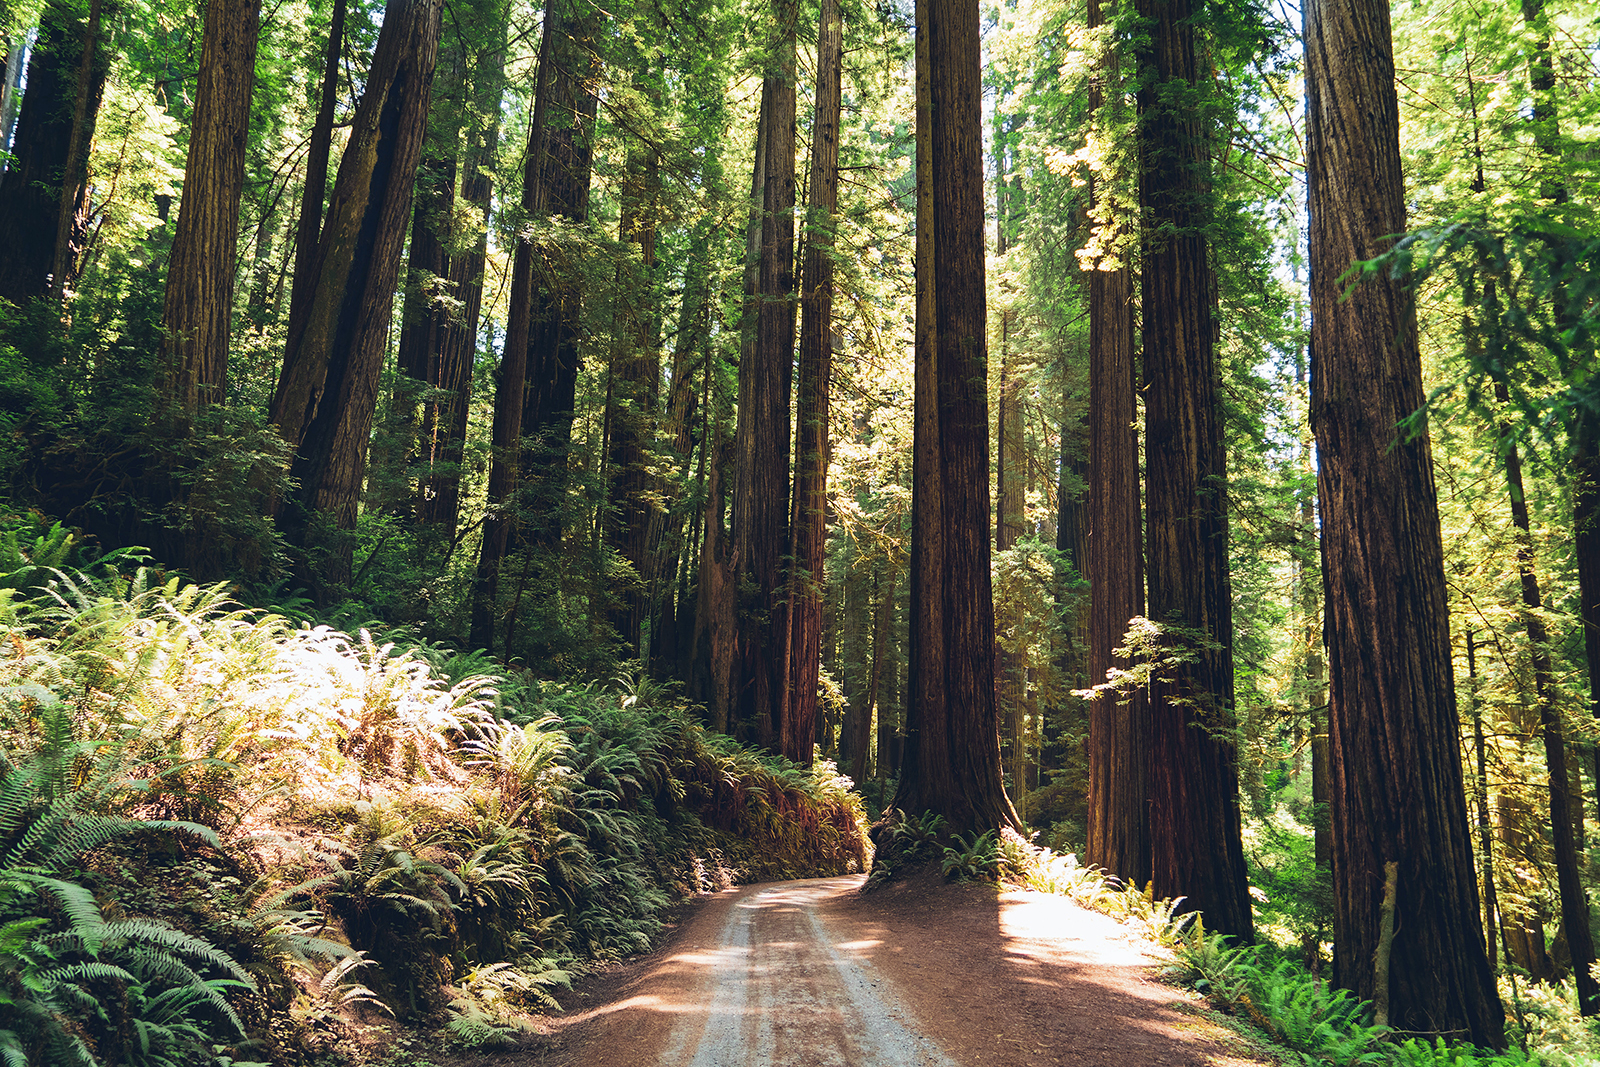 Giant Redwood trees in northern California. Photo by Dan Meyers/Unsplash/Creative Commons